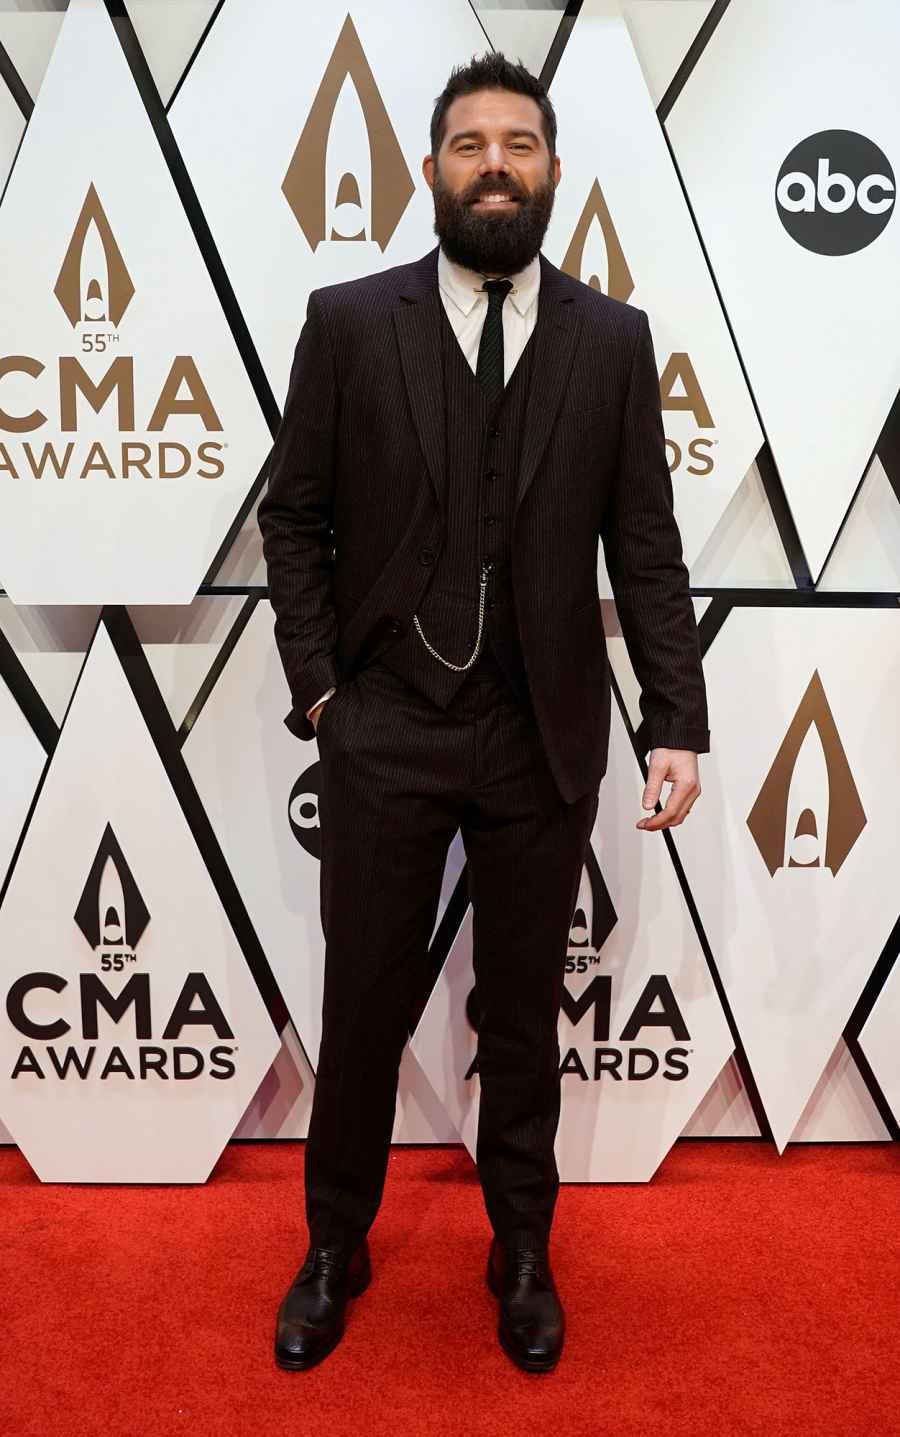 Jordan Davis These Were the Best Dressed Hottest Men at the 2021 CMA Awards